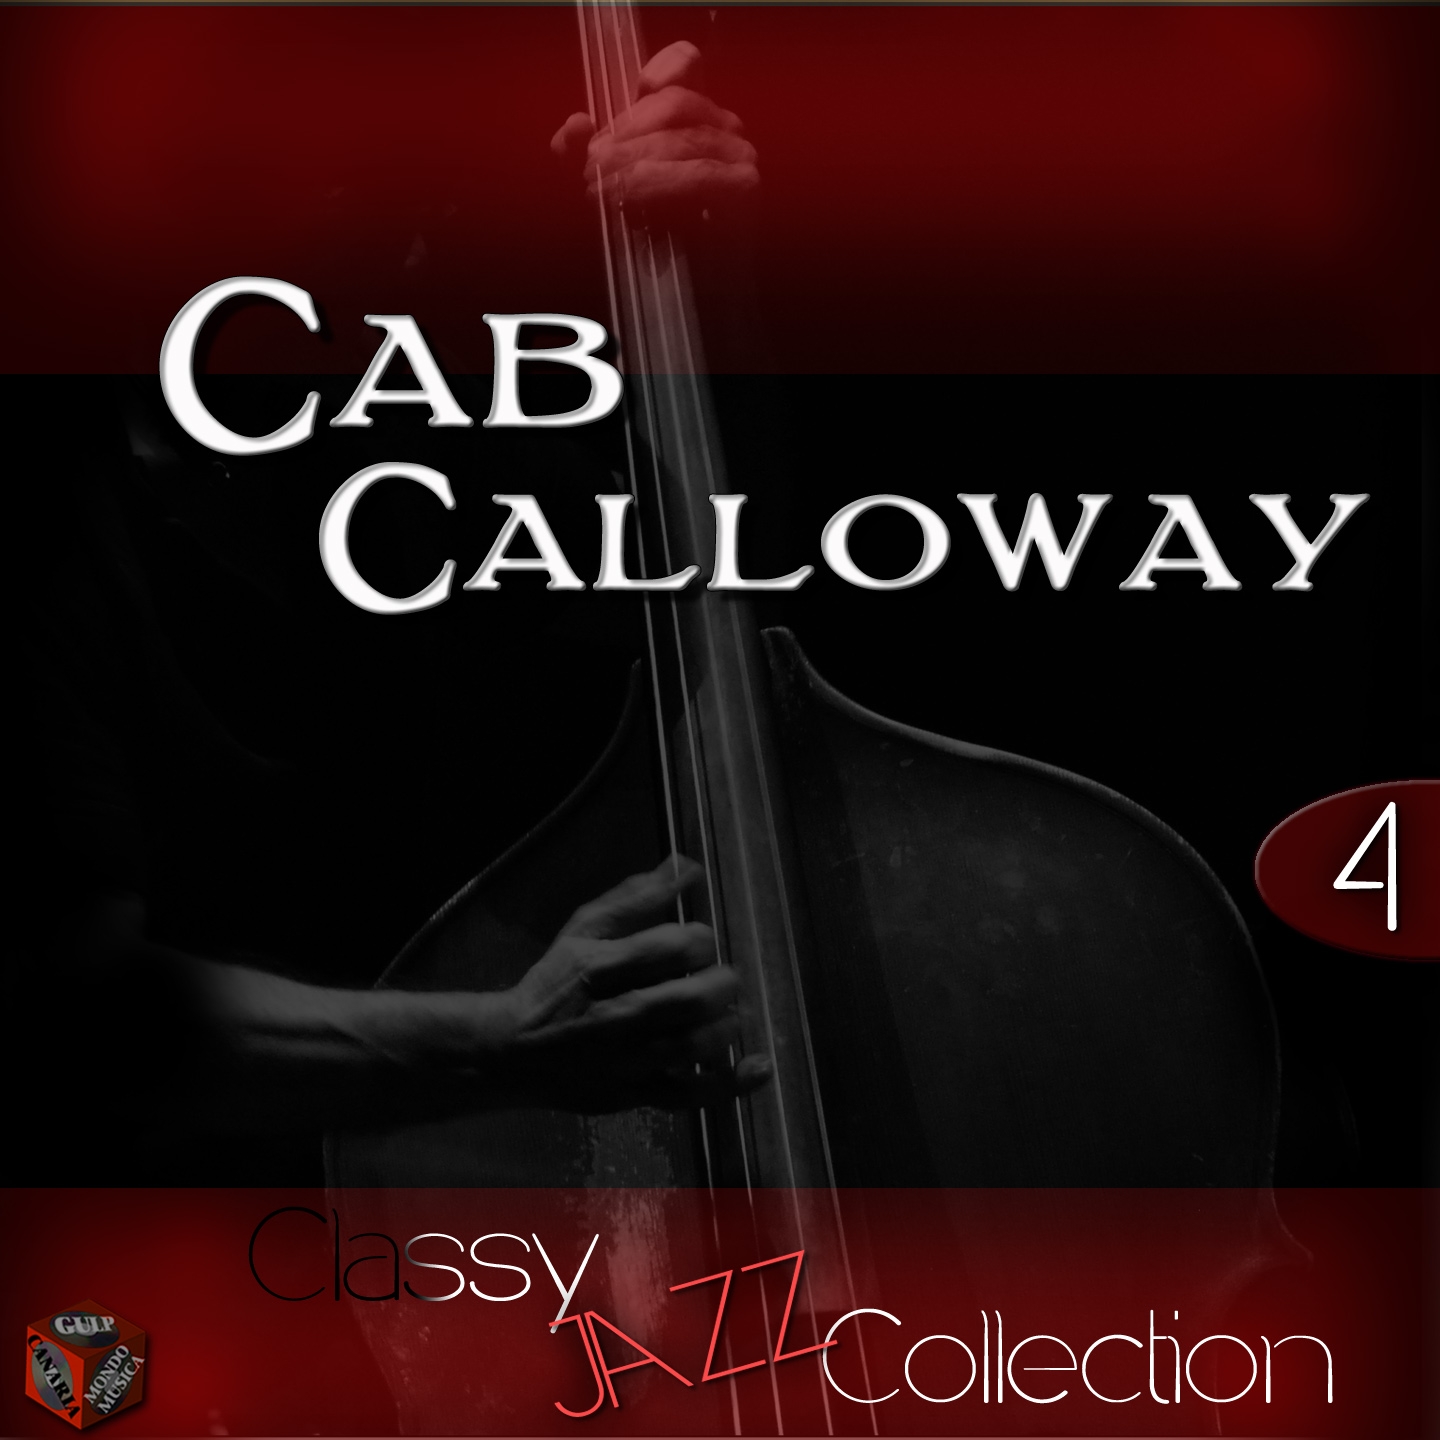 Classy Jazz Collection: Cab Calloway, Vol. 4